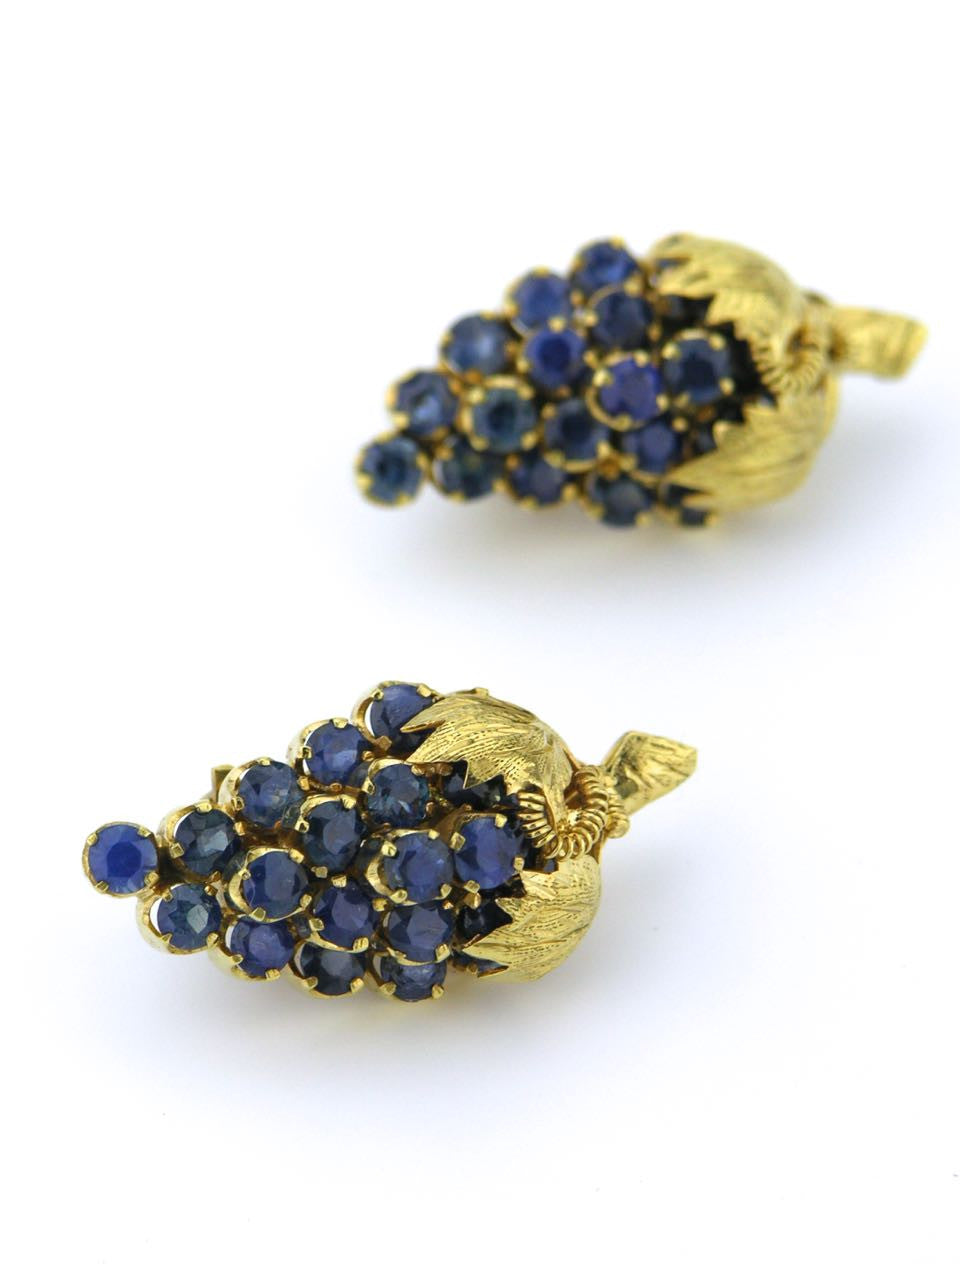 American 14ct yellow gold and blue sapphire clip earrings